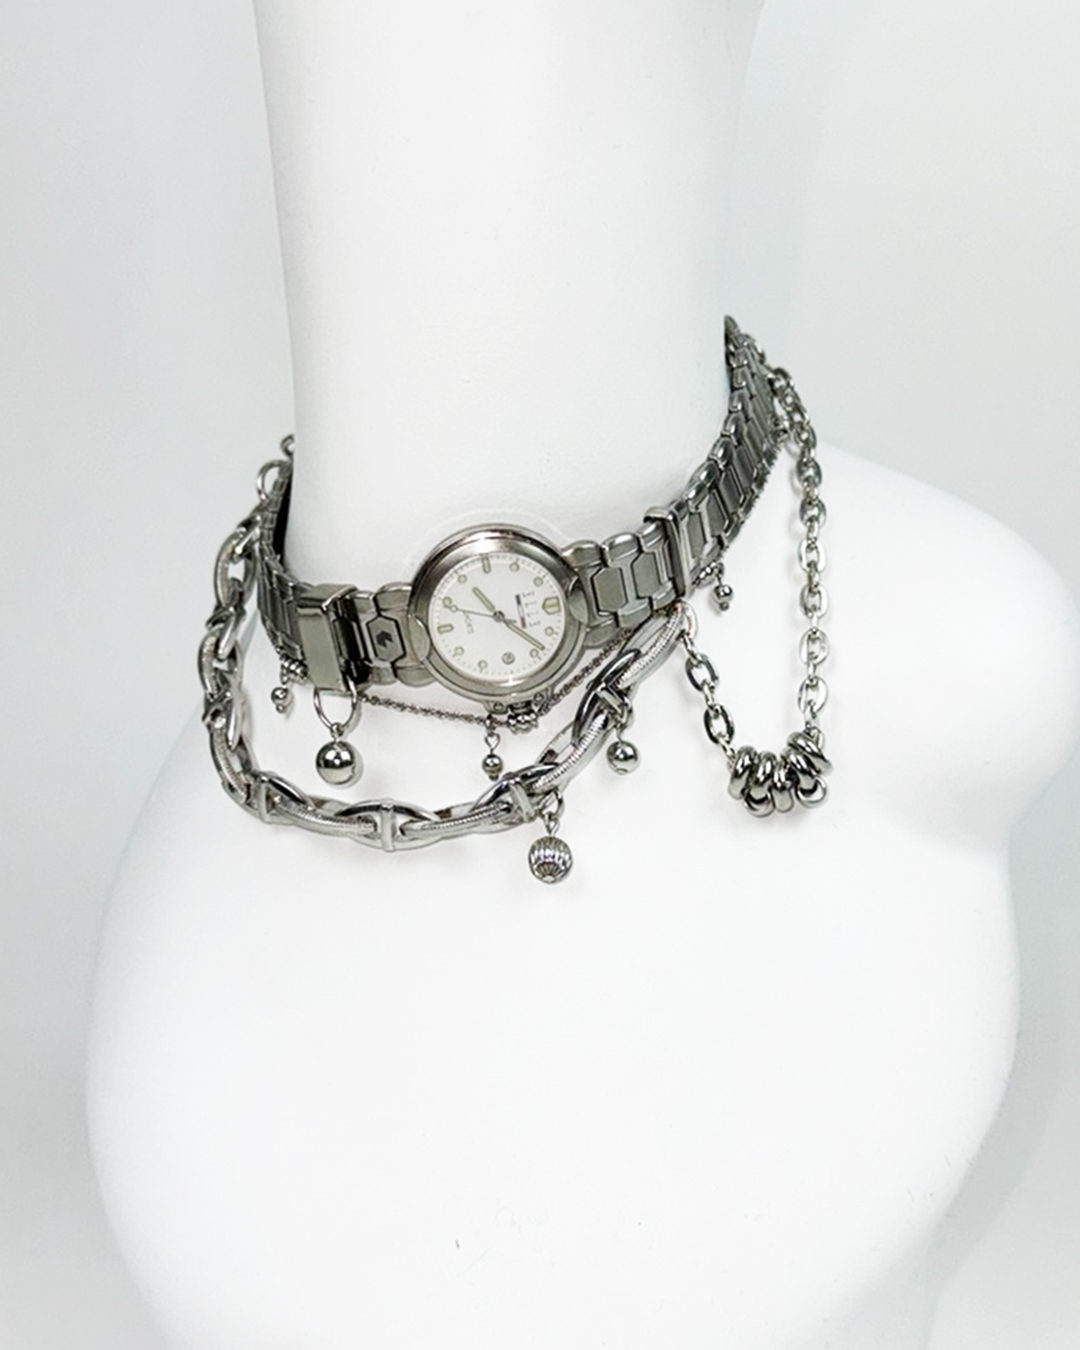 METAL WATCH NECKLACE